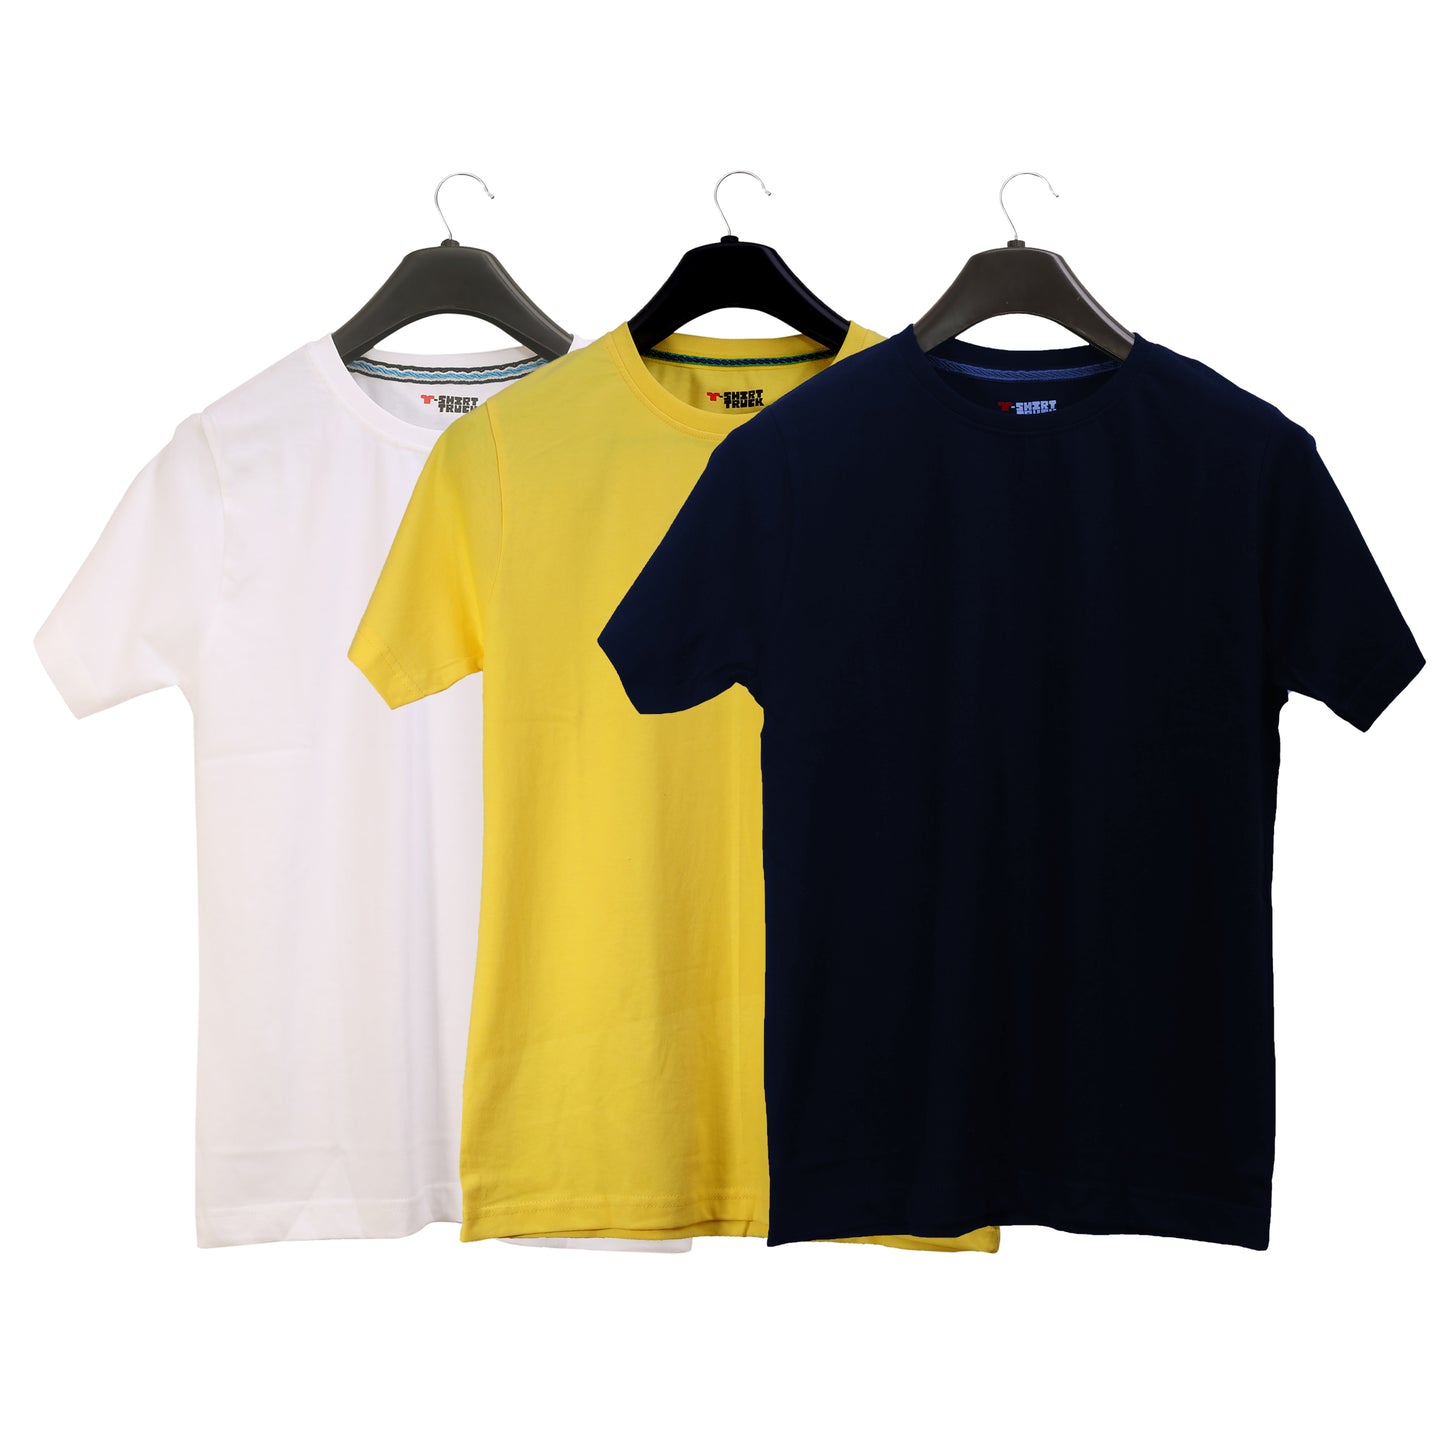 Unisex Round Neck Plain Solid Combo Pack of 3 T-shirts White, Yellow & Blue